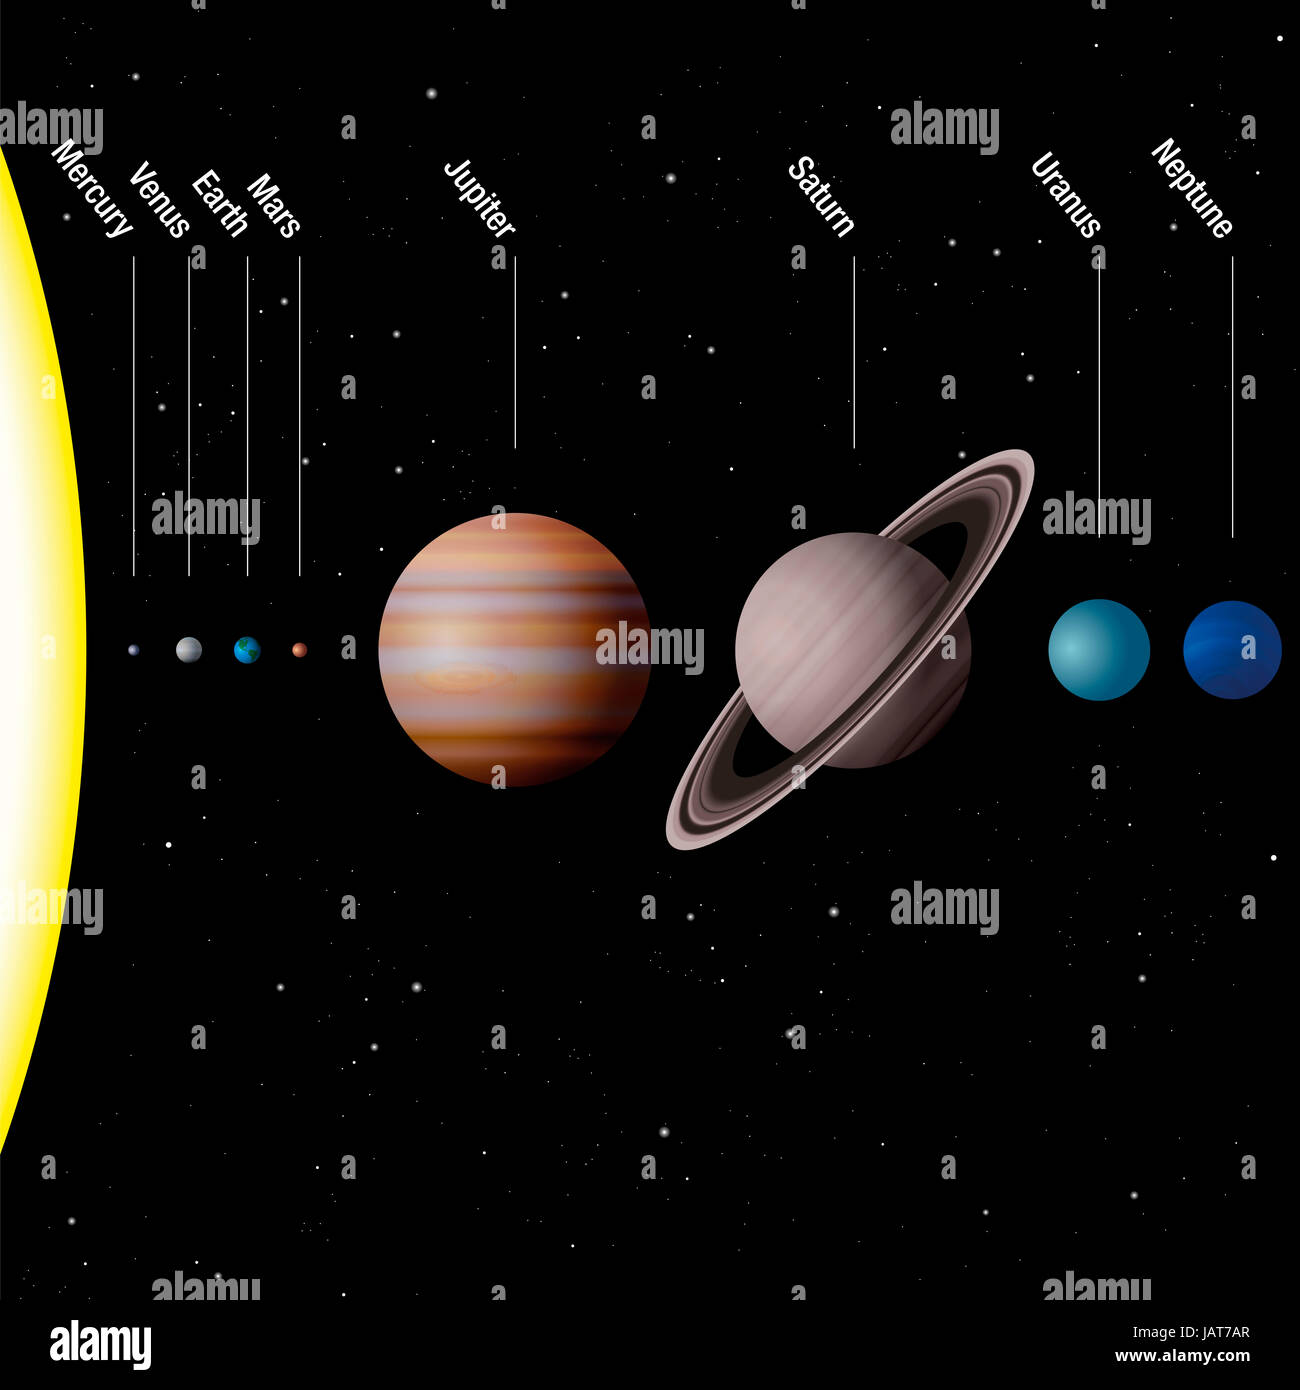 orbits planets to scale